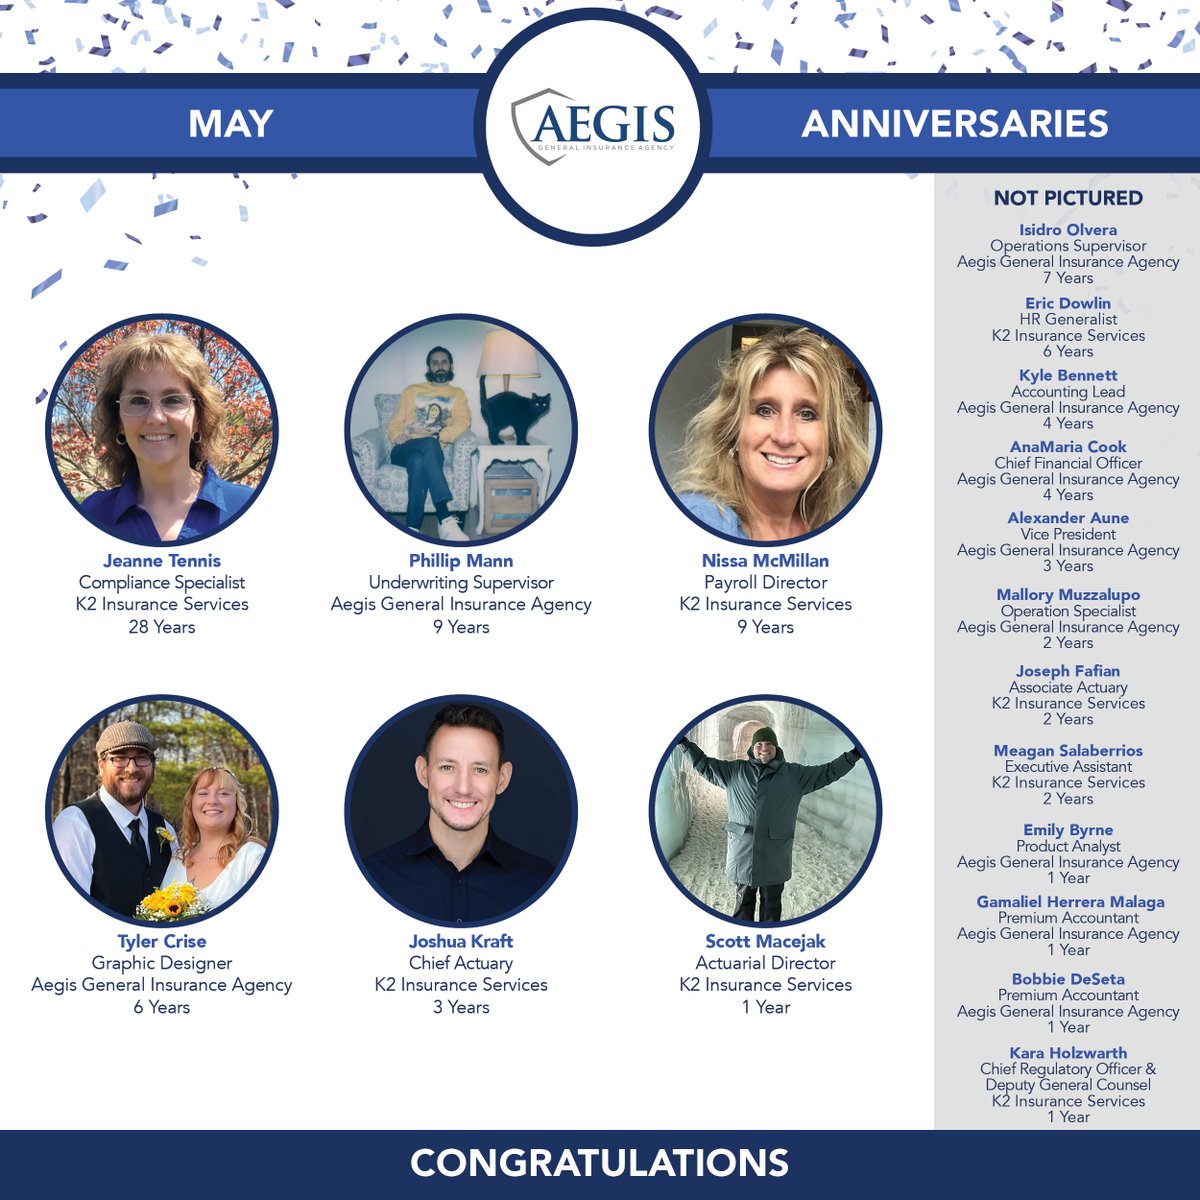 Join us in congratulating these team members on another successful year! We appreciate all that you do and have done over the years as part of our team, Happy Anniversary! #AegisFamilies #AegisNation #AffordableHousing